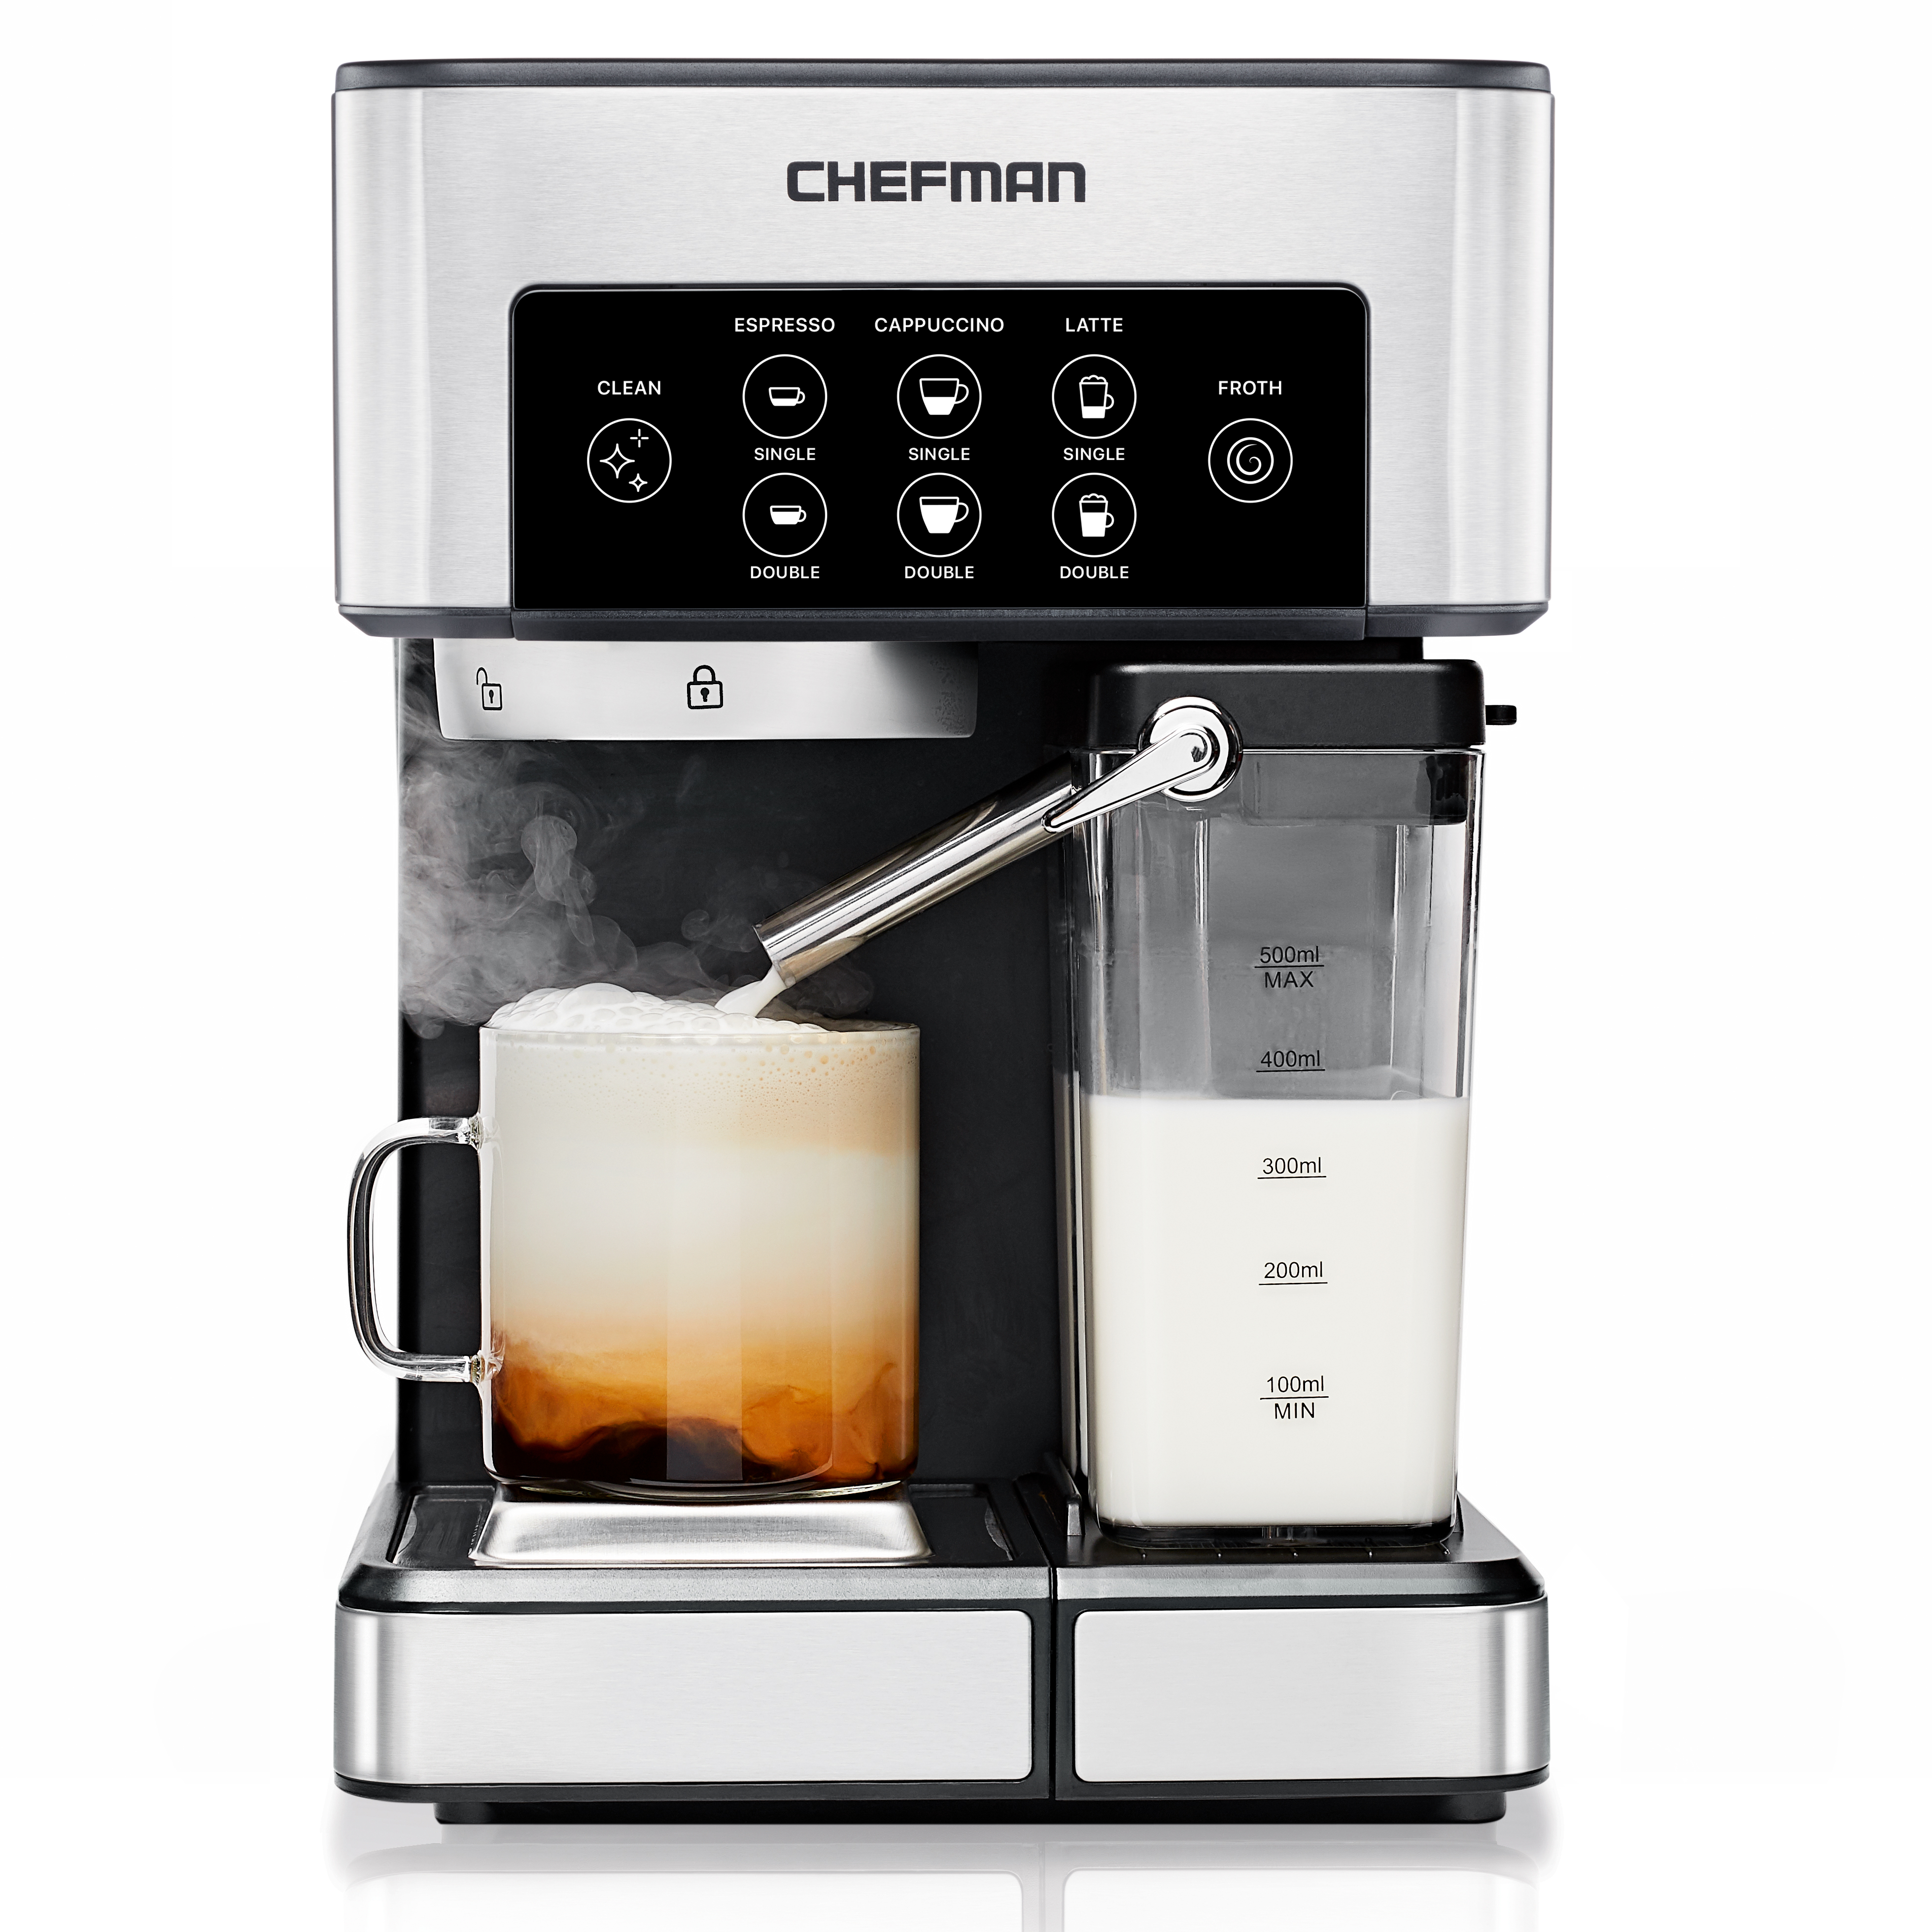 Chefman Barista Pro 6-in-1 Espresso Machine with Milk Frother, 15-BAR Pump, 1.8L Water Reservoir, Stainless Steel - image 1 of 9